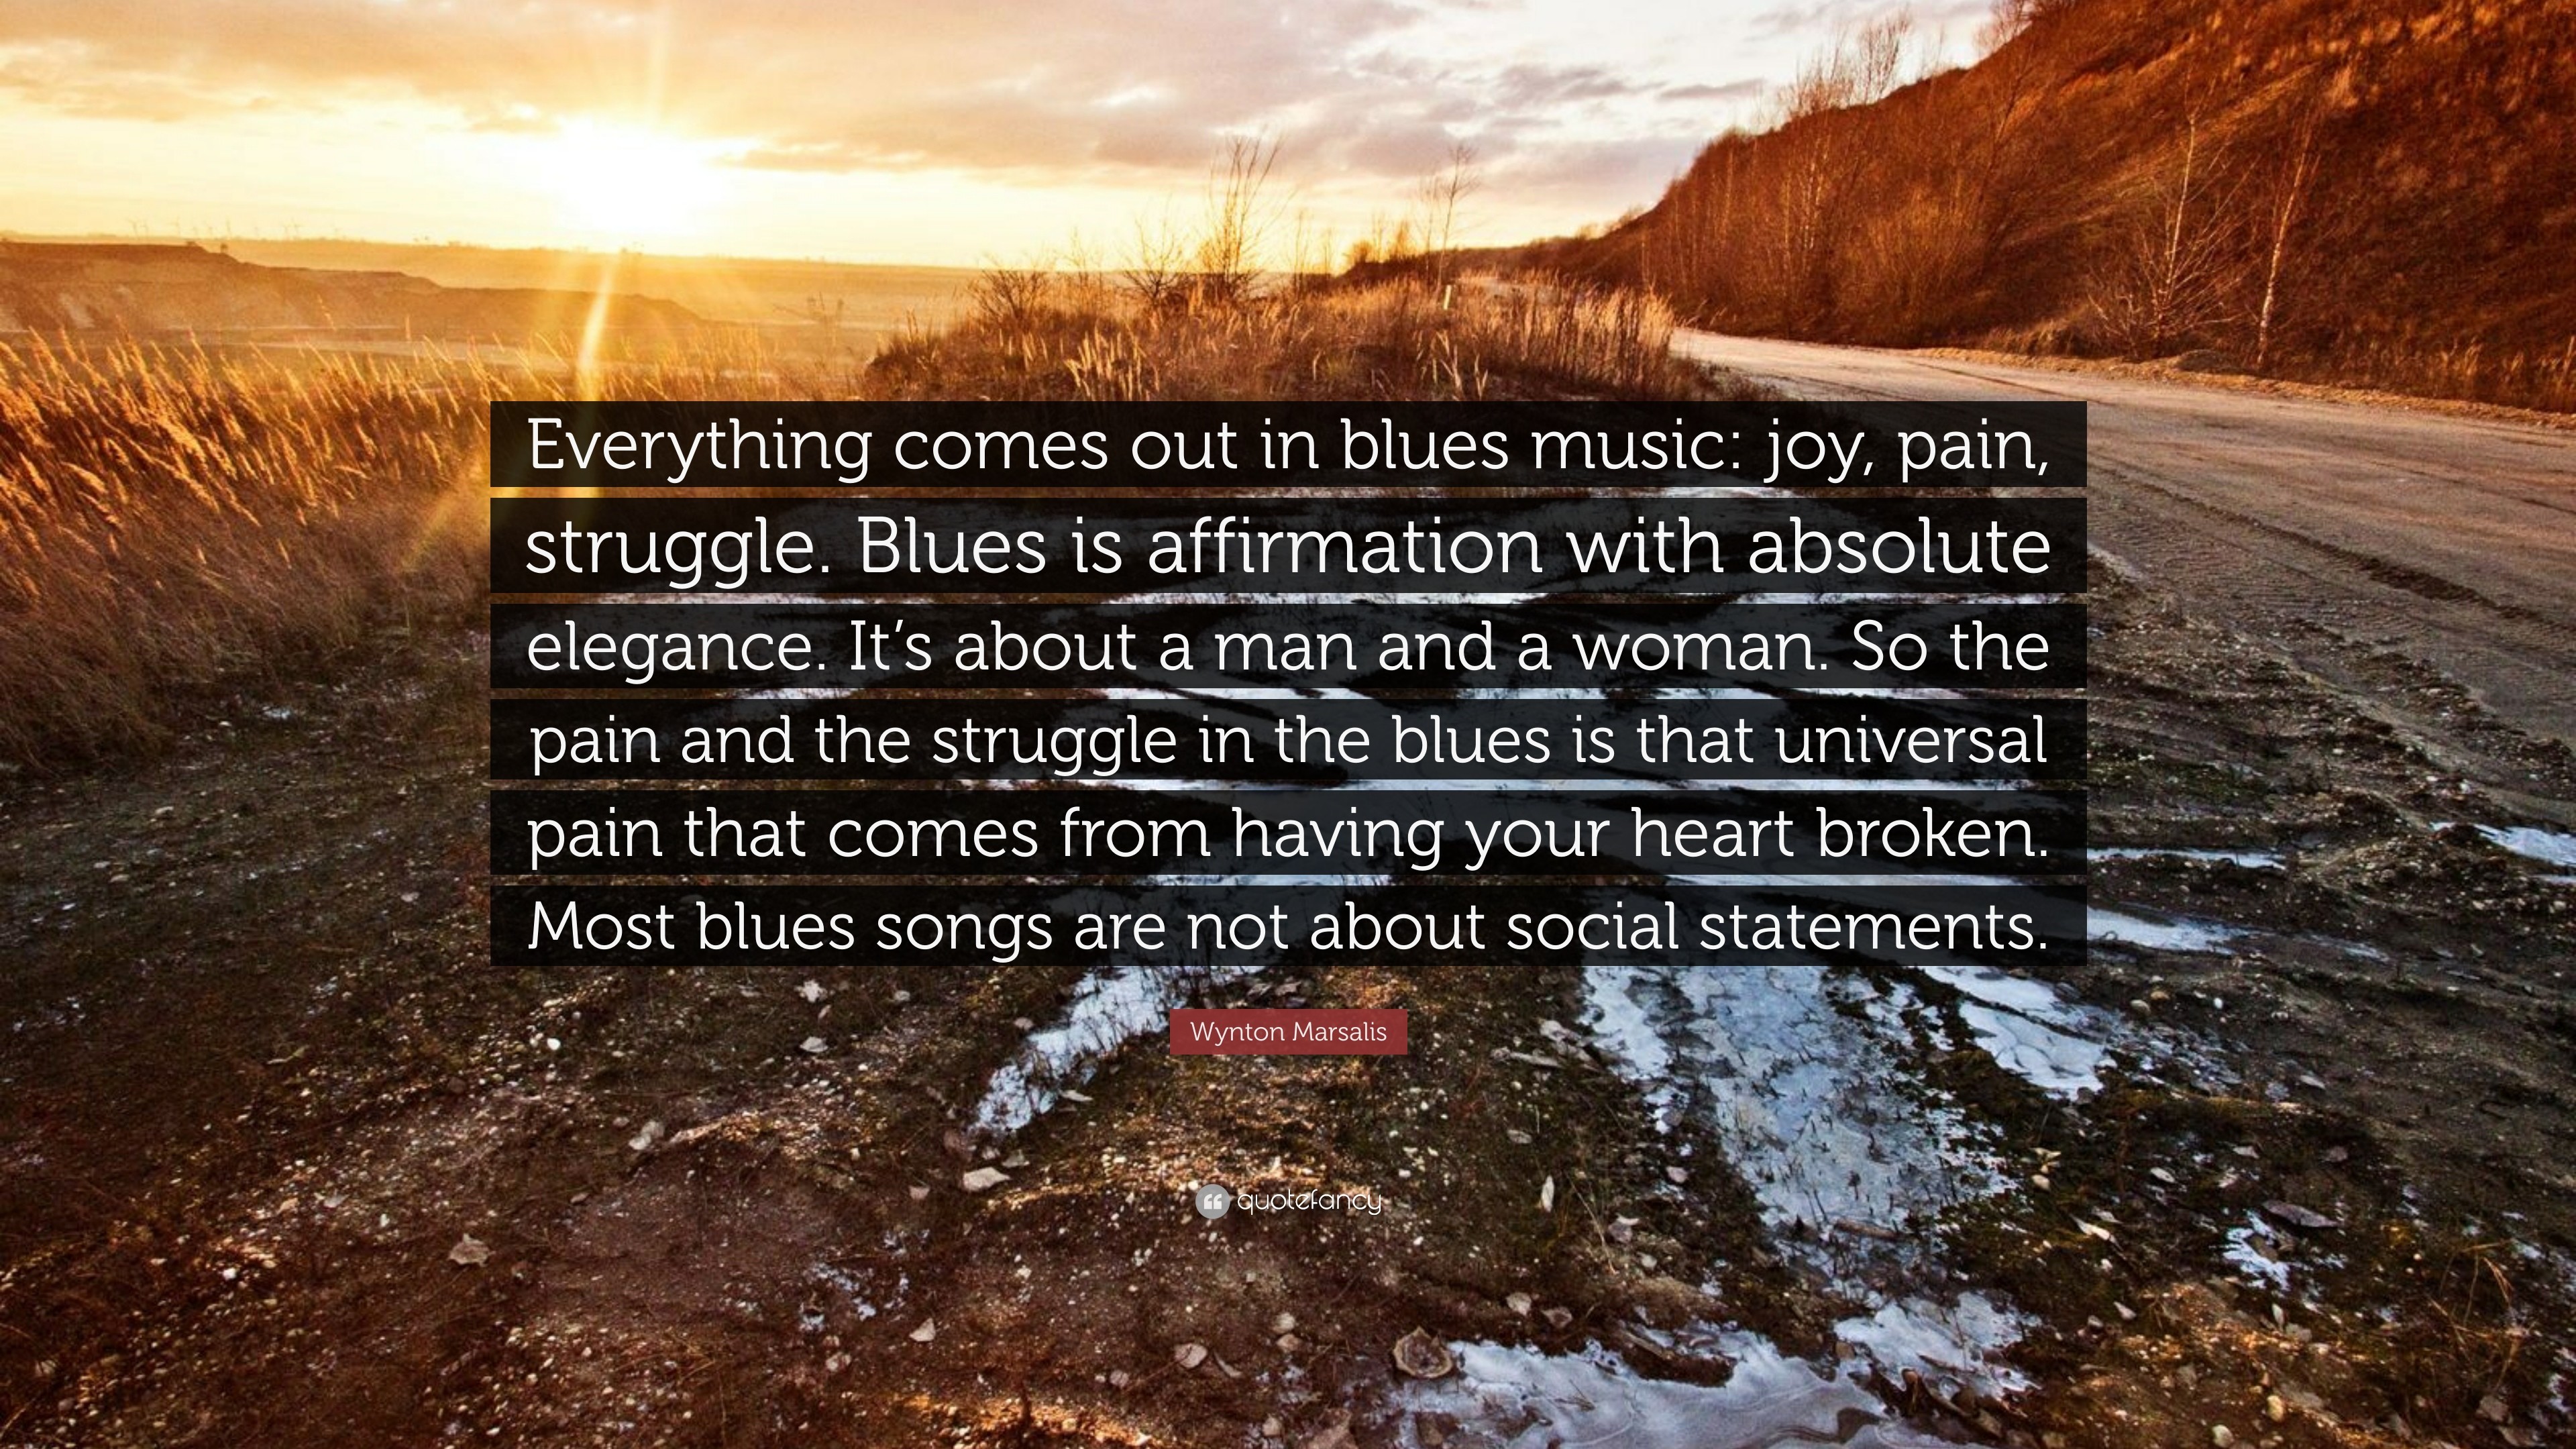 3840x2160 Wynton Marsalis Quote: “Everything comes out in blues music: joy, pain,